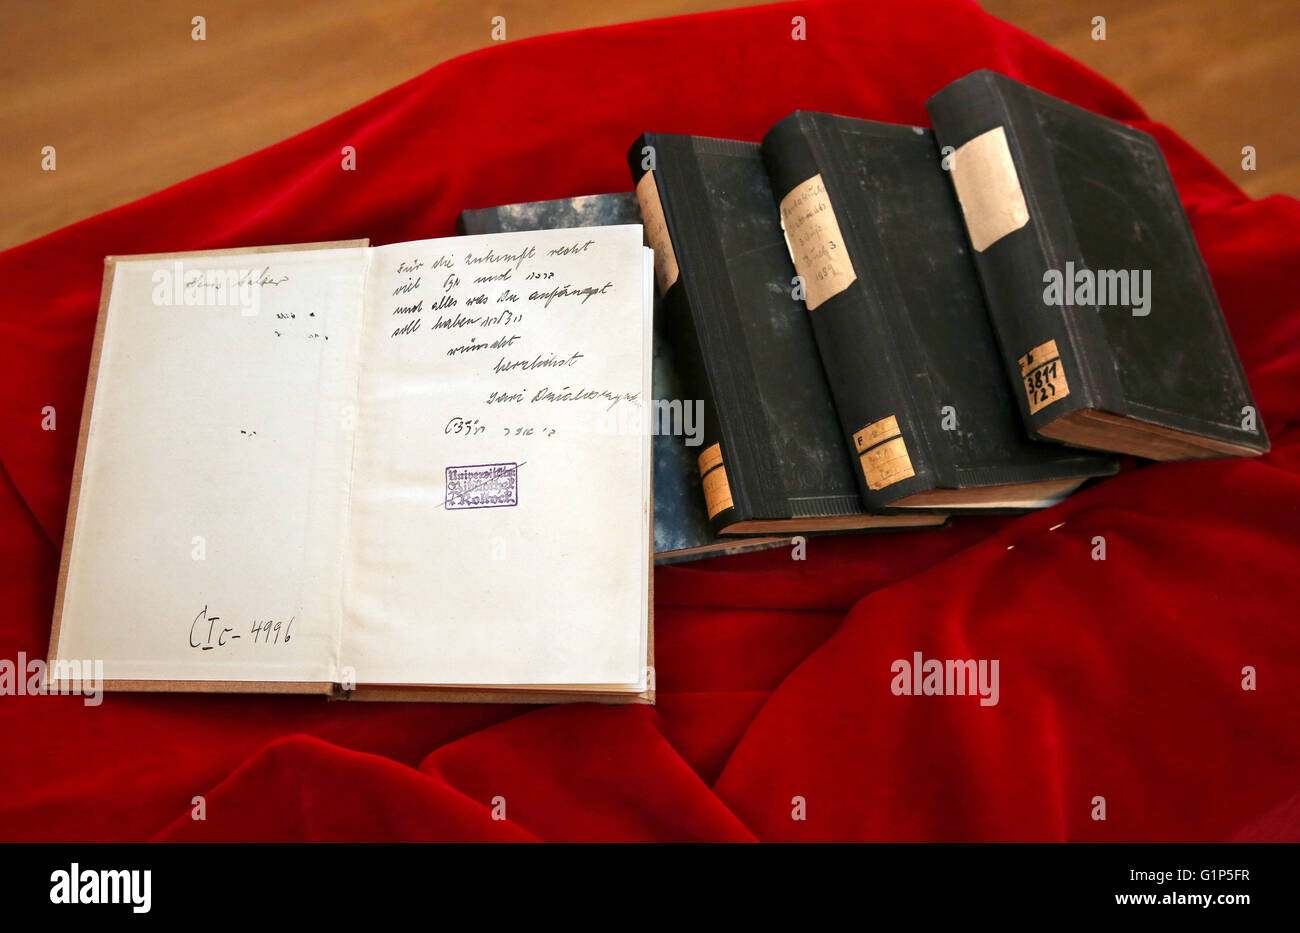 Rostock, Germany. 18th May, 2016. Stolen books from the inventory of the Rostock university library seen at the restitution ceremony to heiress Audrey Goodman of the USA, in Rostock, Germany, 18 May 2016. A project supported by the German Lost Art Foundation was launched to locate the German Nazi plunder goods. The nine books were wrongfully seized by the Nazis and subsequently exchanged or donated to the Rostock university library. Photo: BERND WUESTNECK/dpa/Alamy Live News Stock Photo